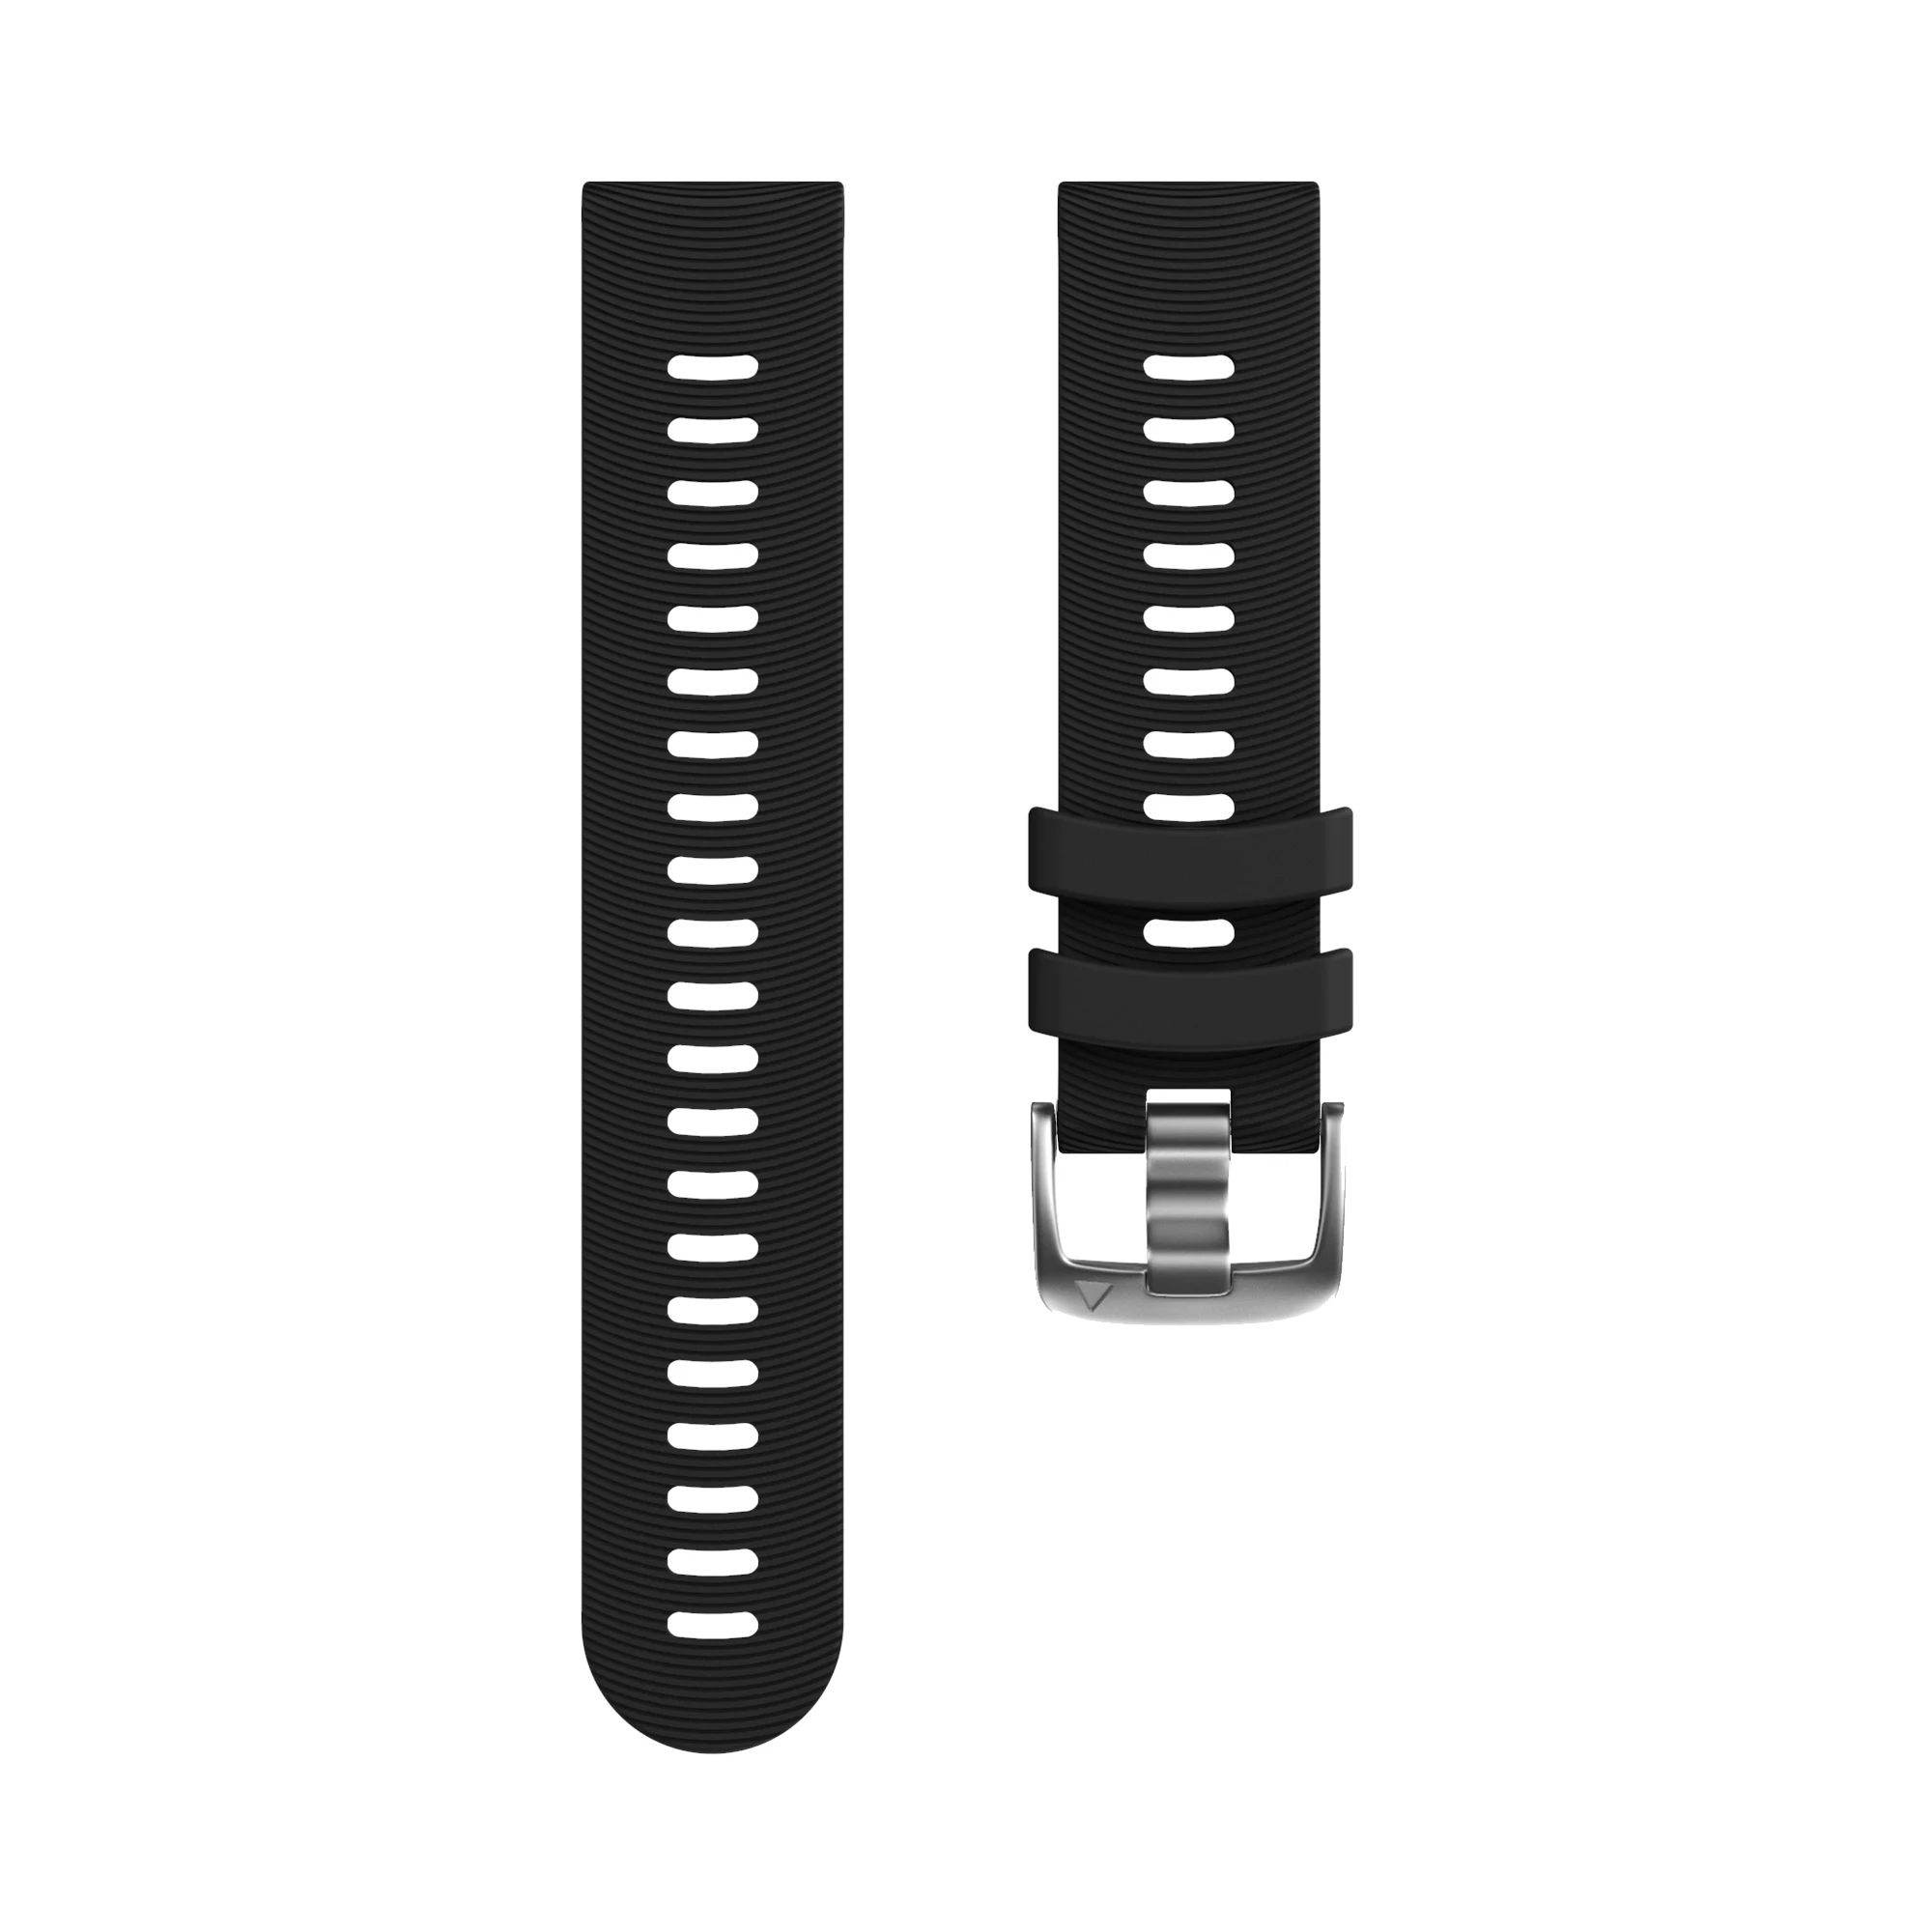  Band for Garmin Forerunner 55, Quick Release Band Replacement  for Garmin Forerunner 158 / Forerunner 55 (No Tracker, Replacement Bands  Only) : Electronics